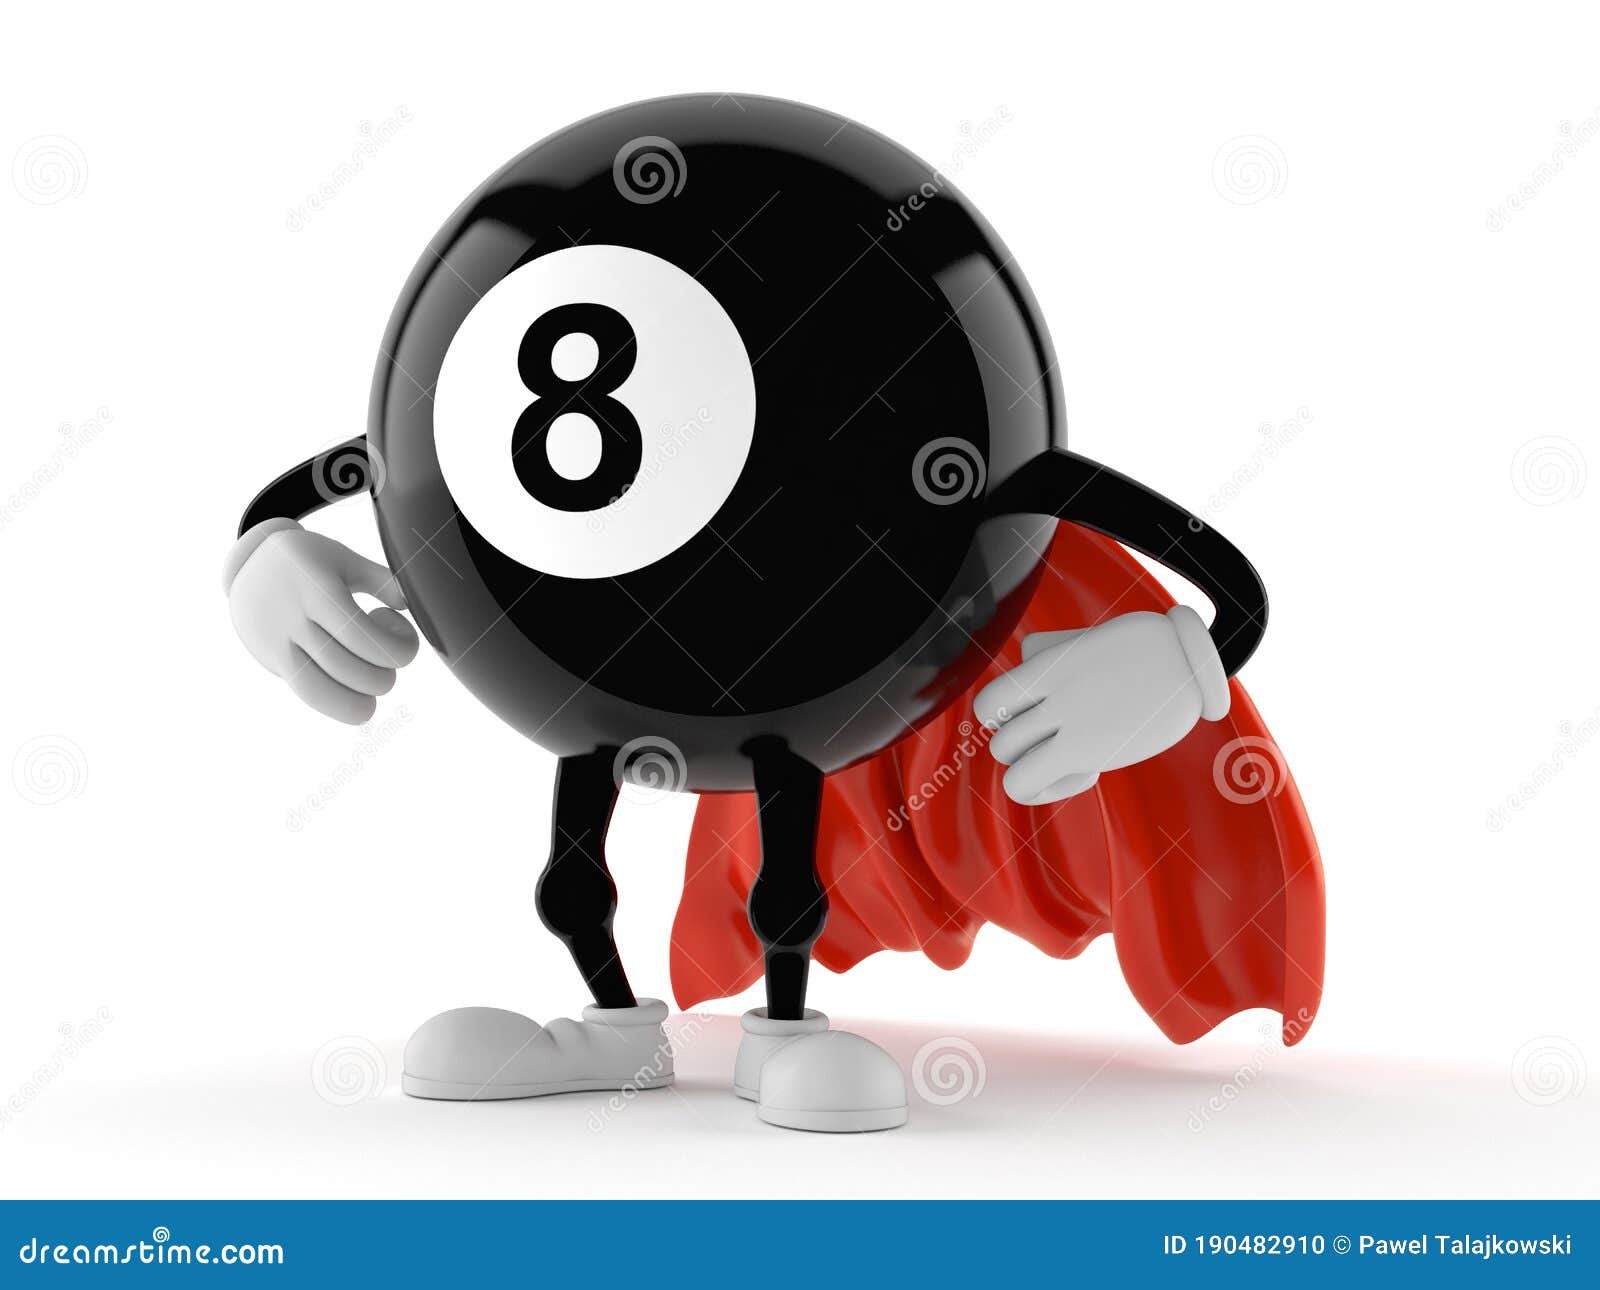 eight ball character with hero cape